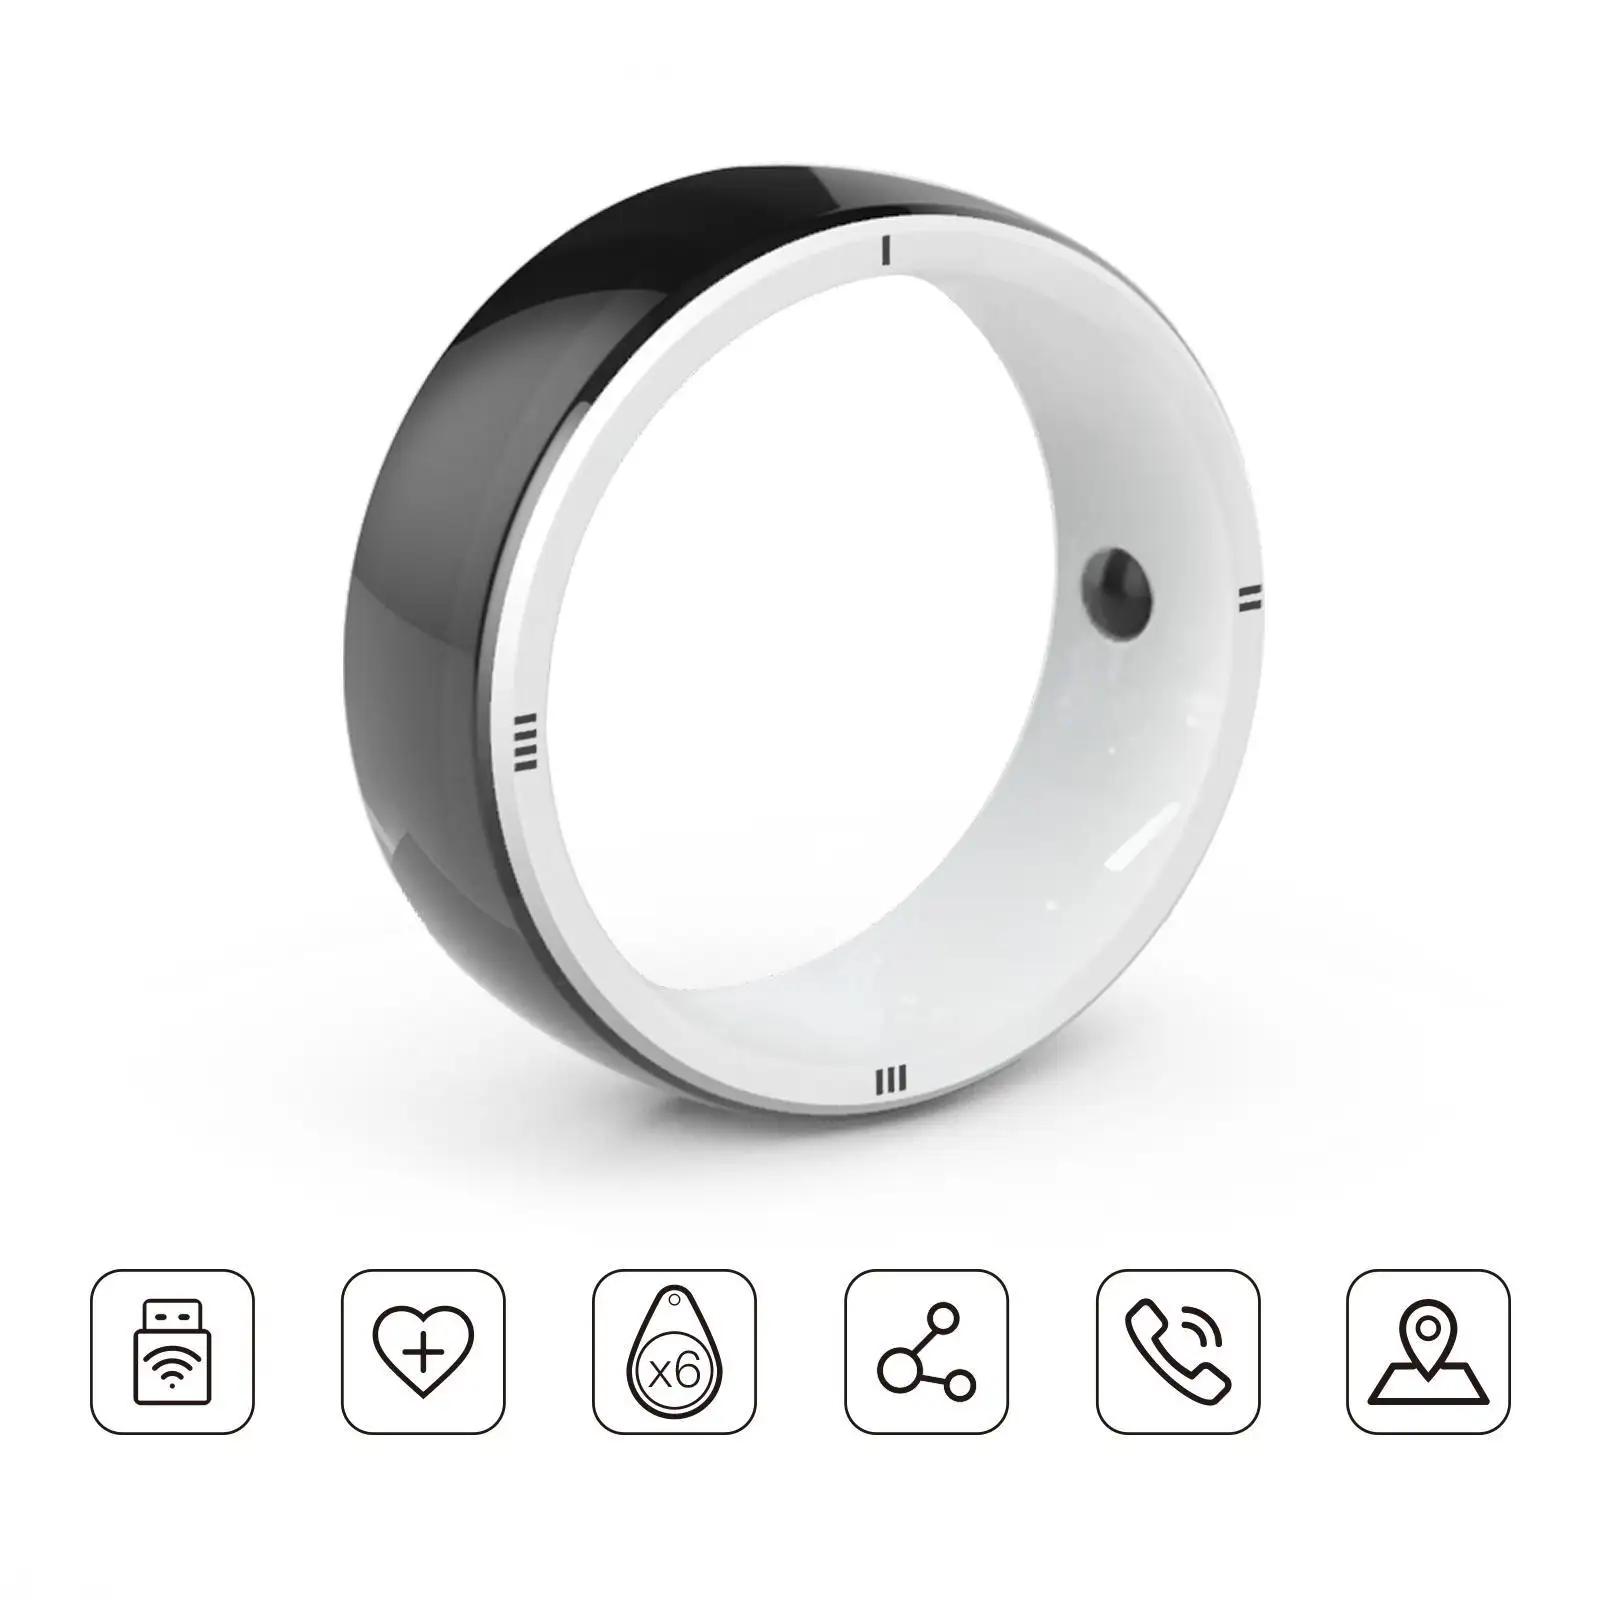 JAKCOM R5 Smart Ring New Smart Ring Super value than airconditioner solar for pc epub wireless coaster pager xs max screen